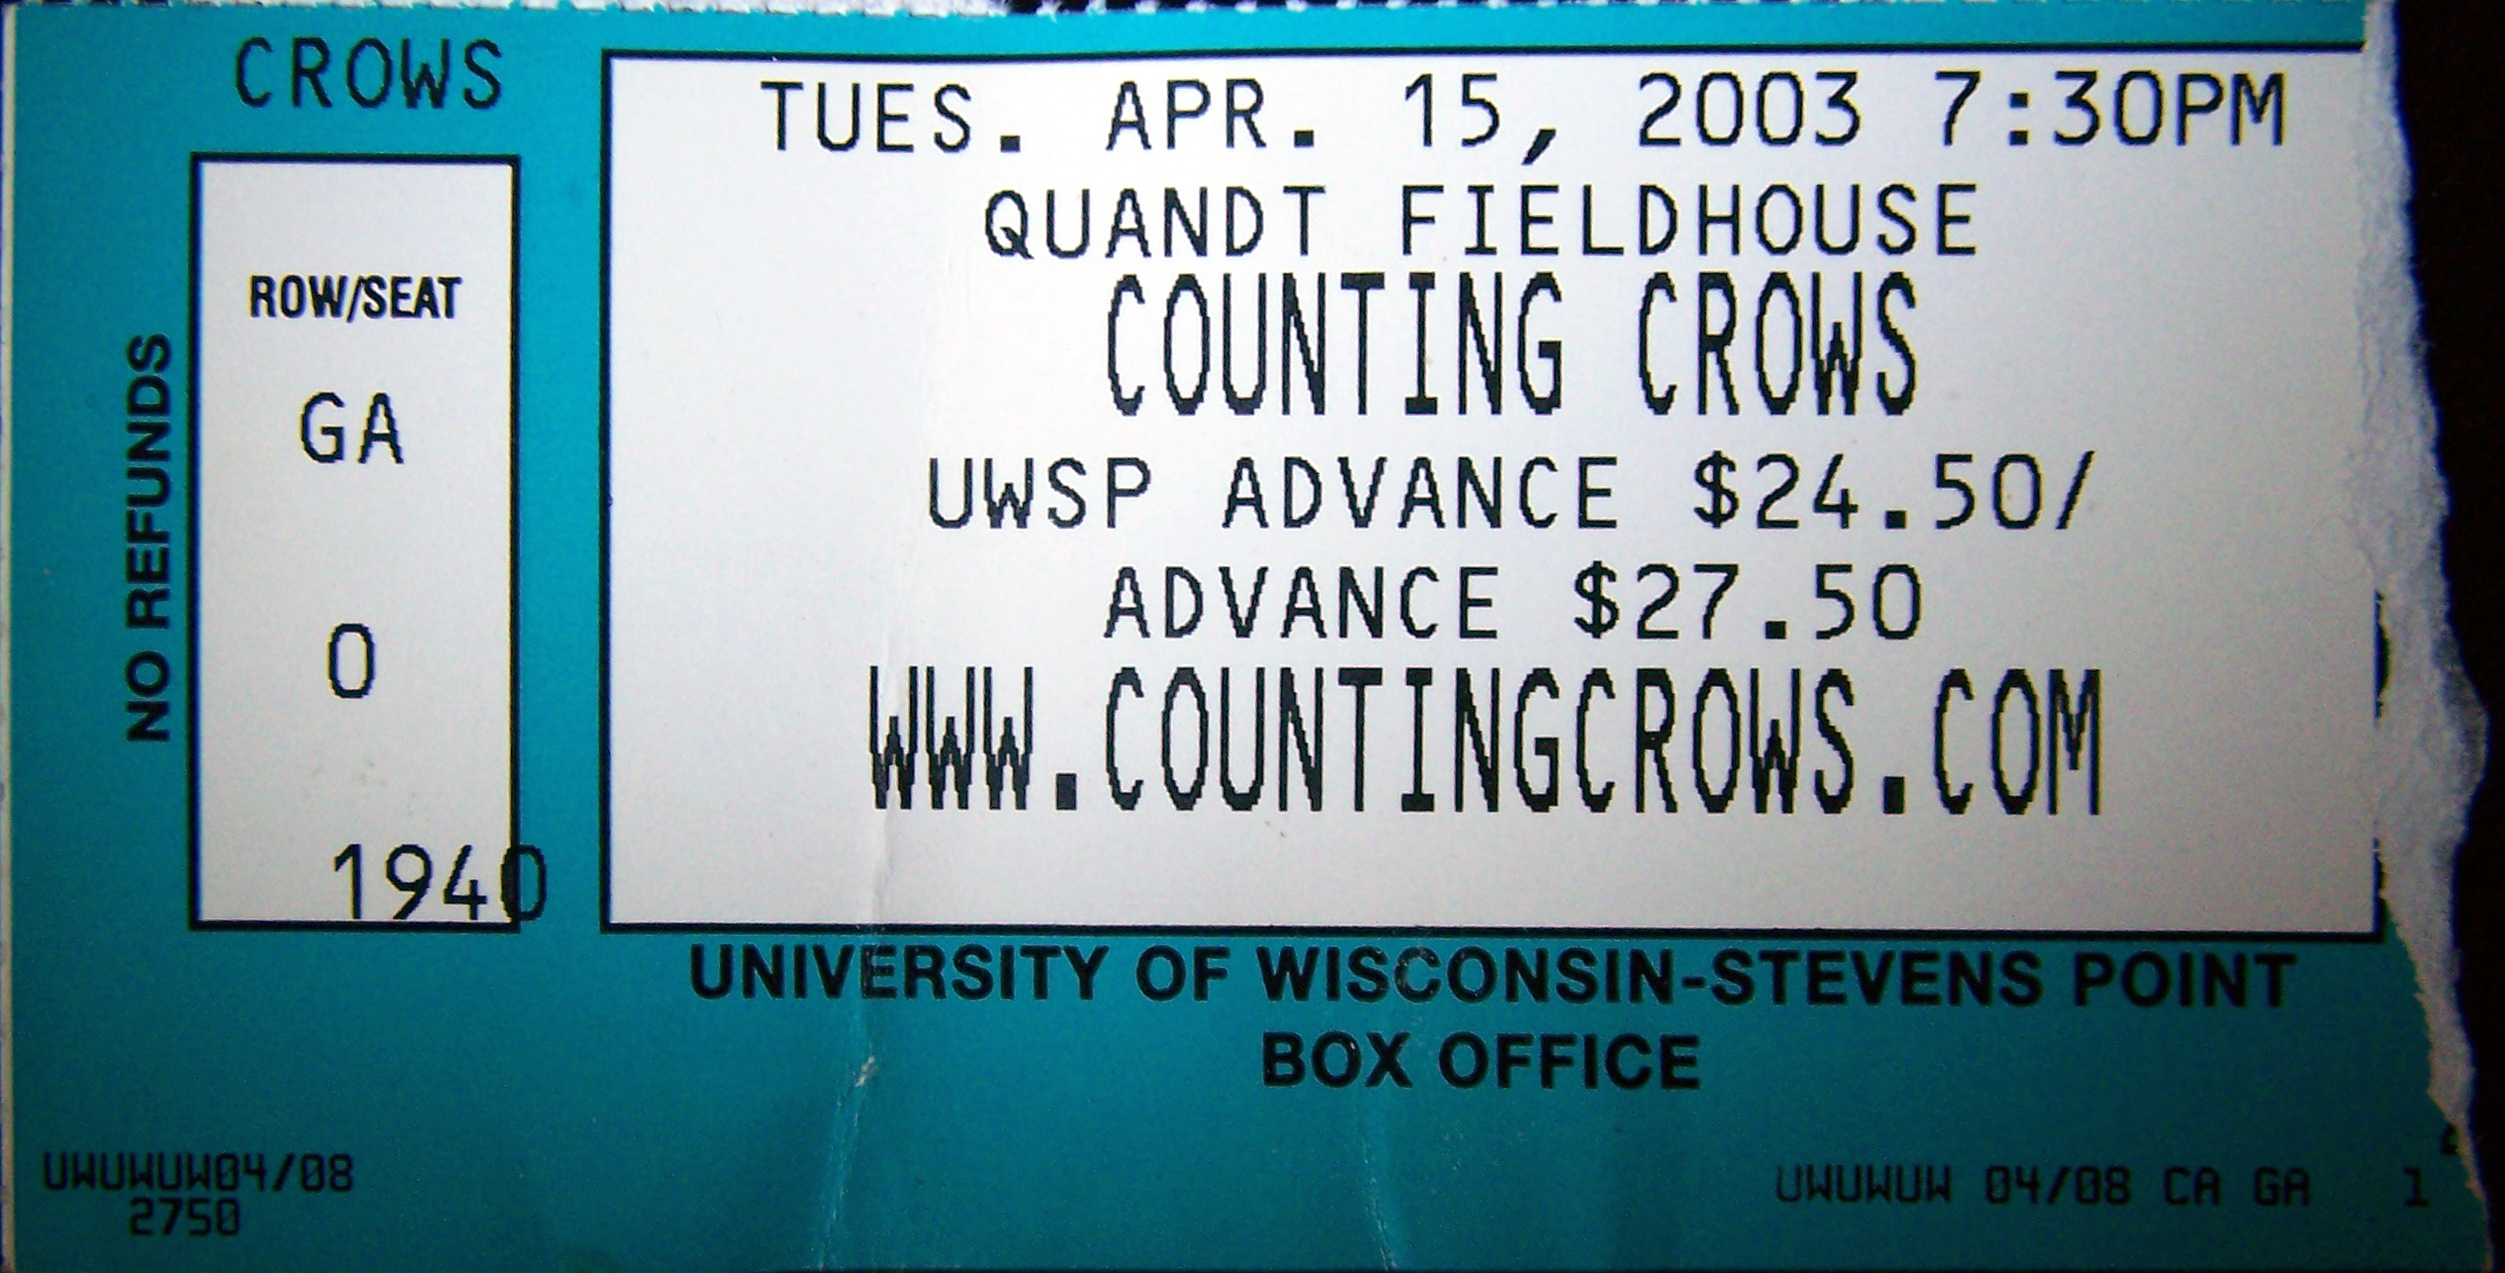 CountingCrows2003-04-15QuandtFieldhouseStevensPointWI.jpg